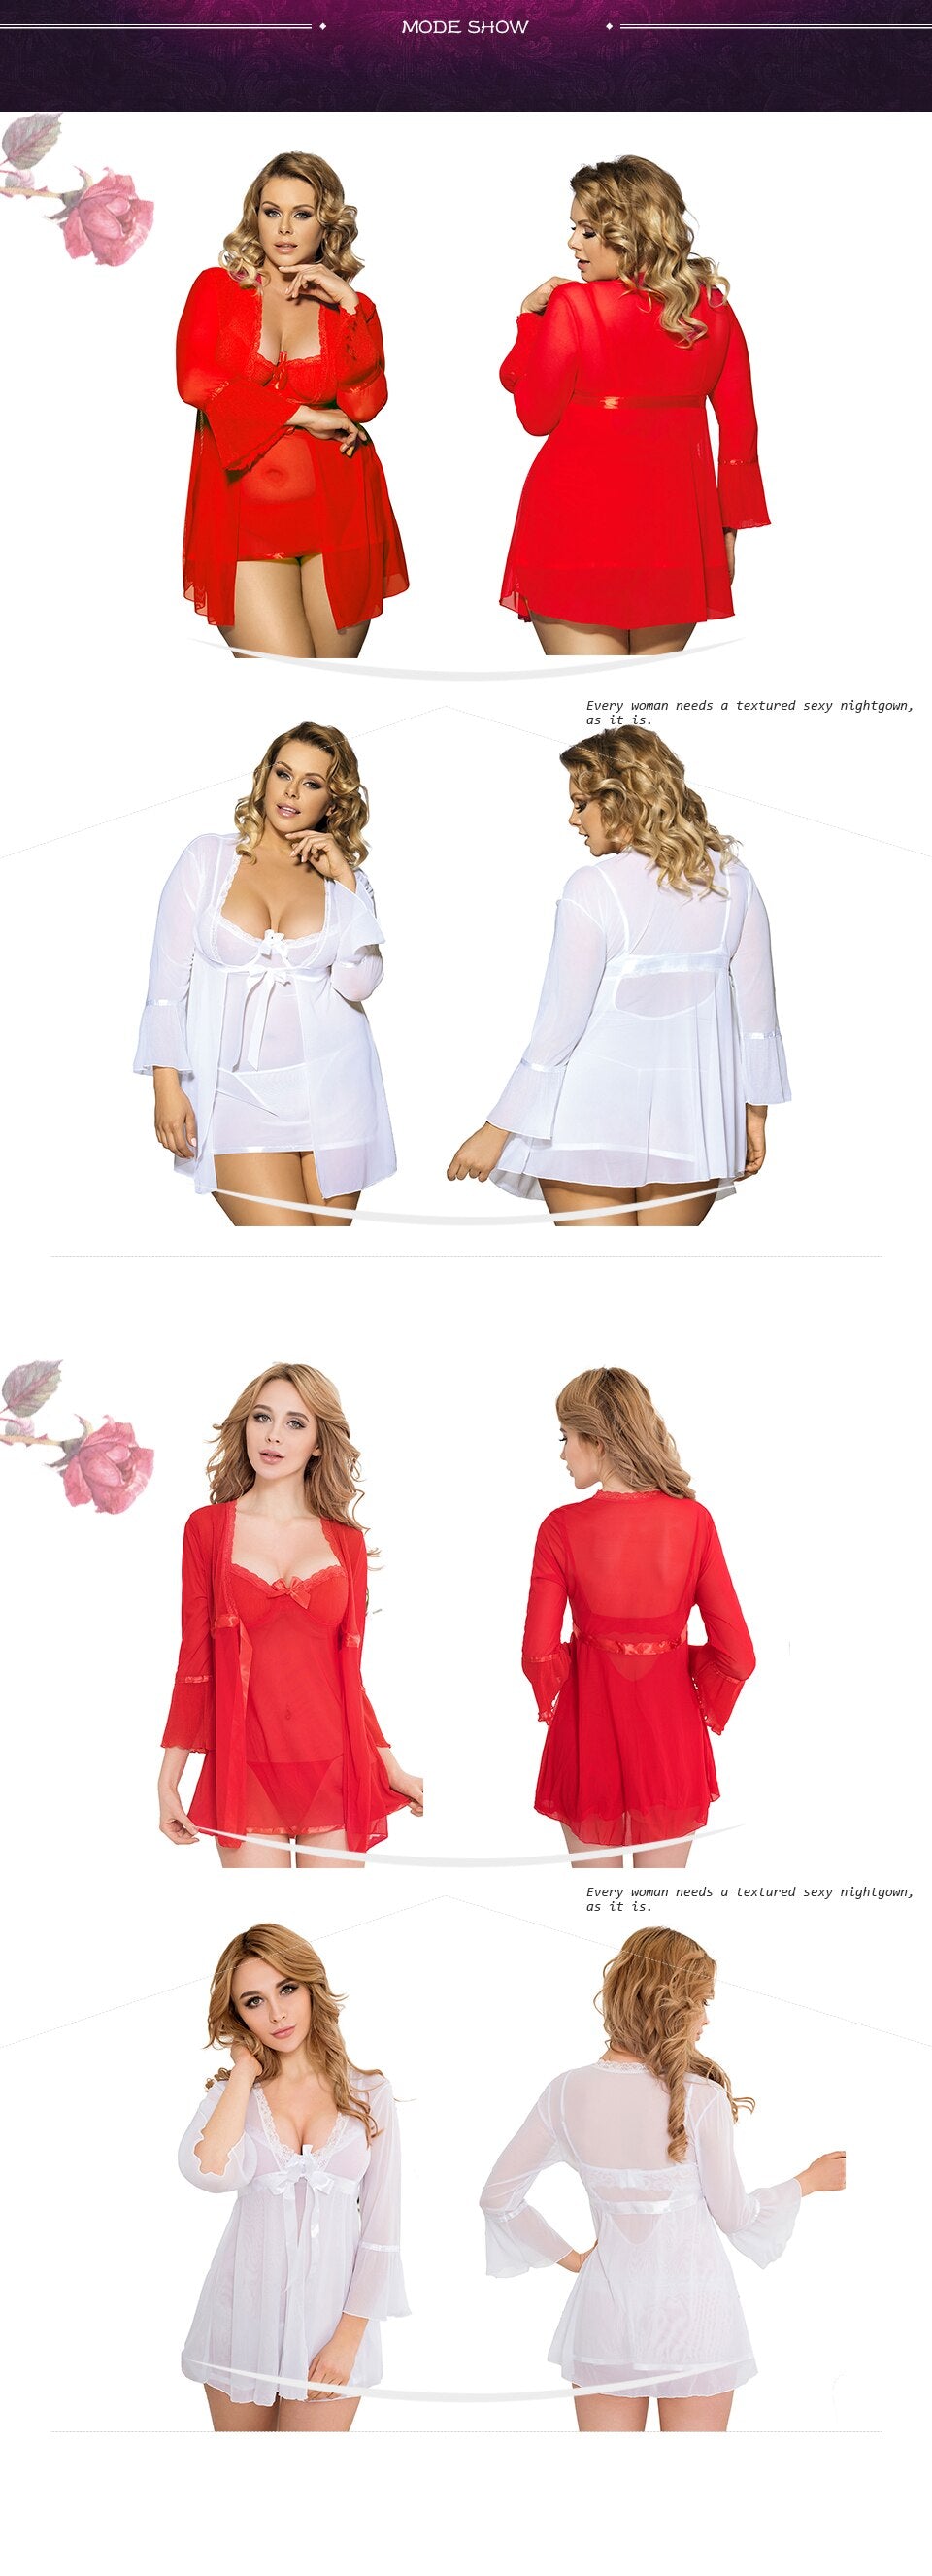 Up to XXXL Sexy Lingerie Divine Soft Nightgown Top +G string+Coat - Own Pleasures